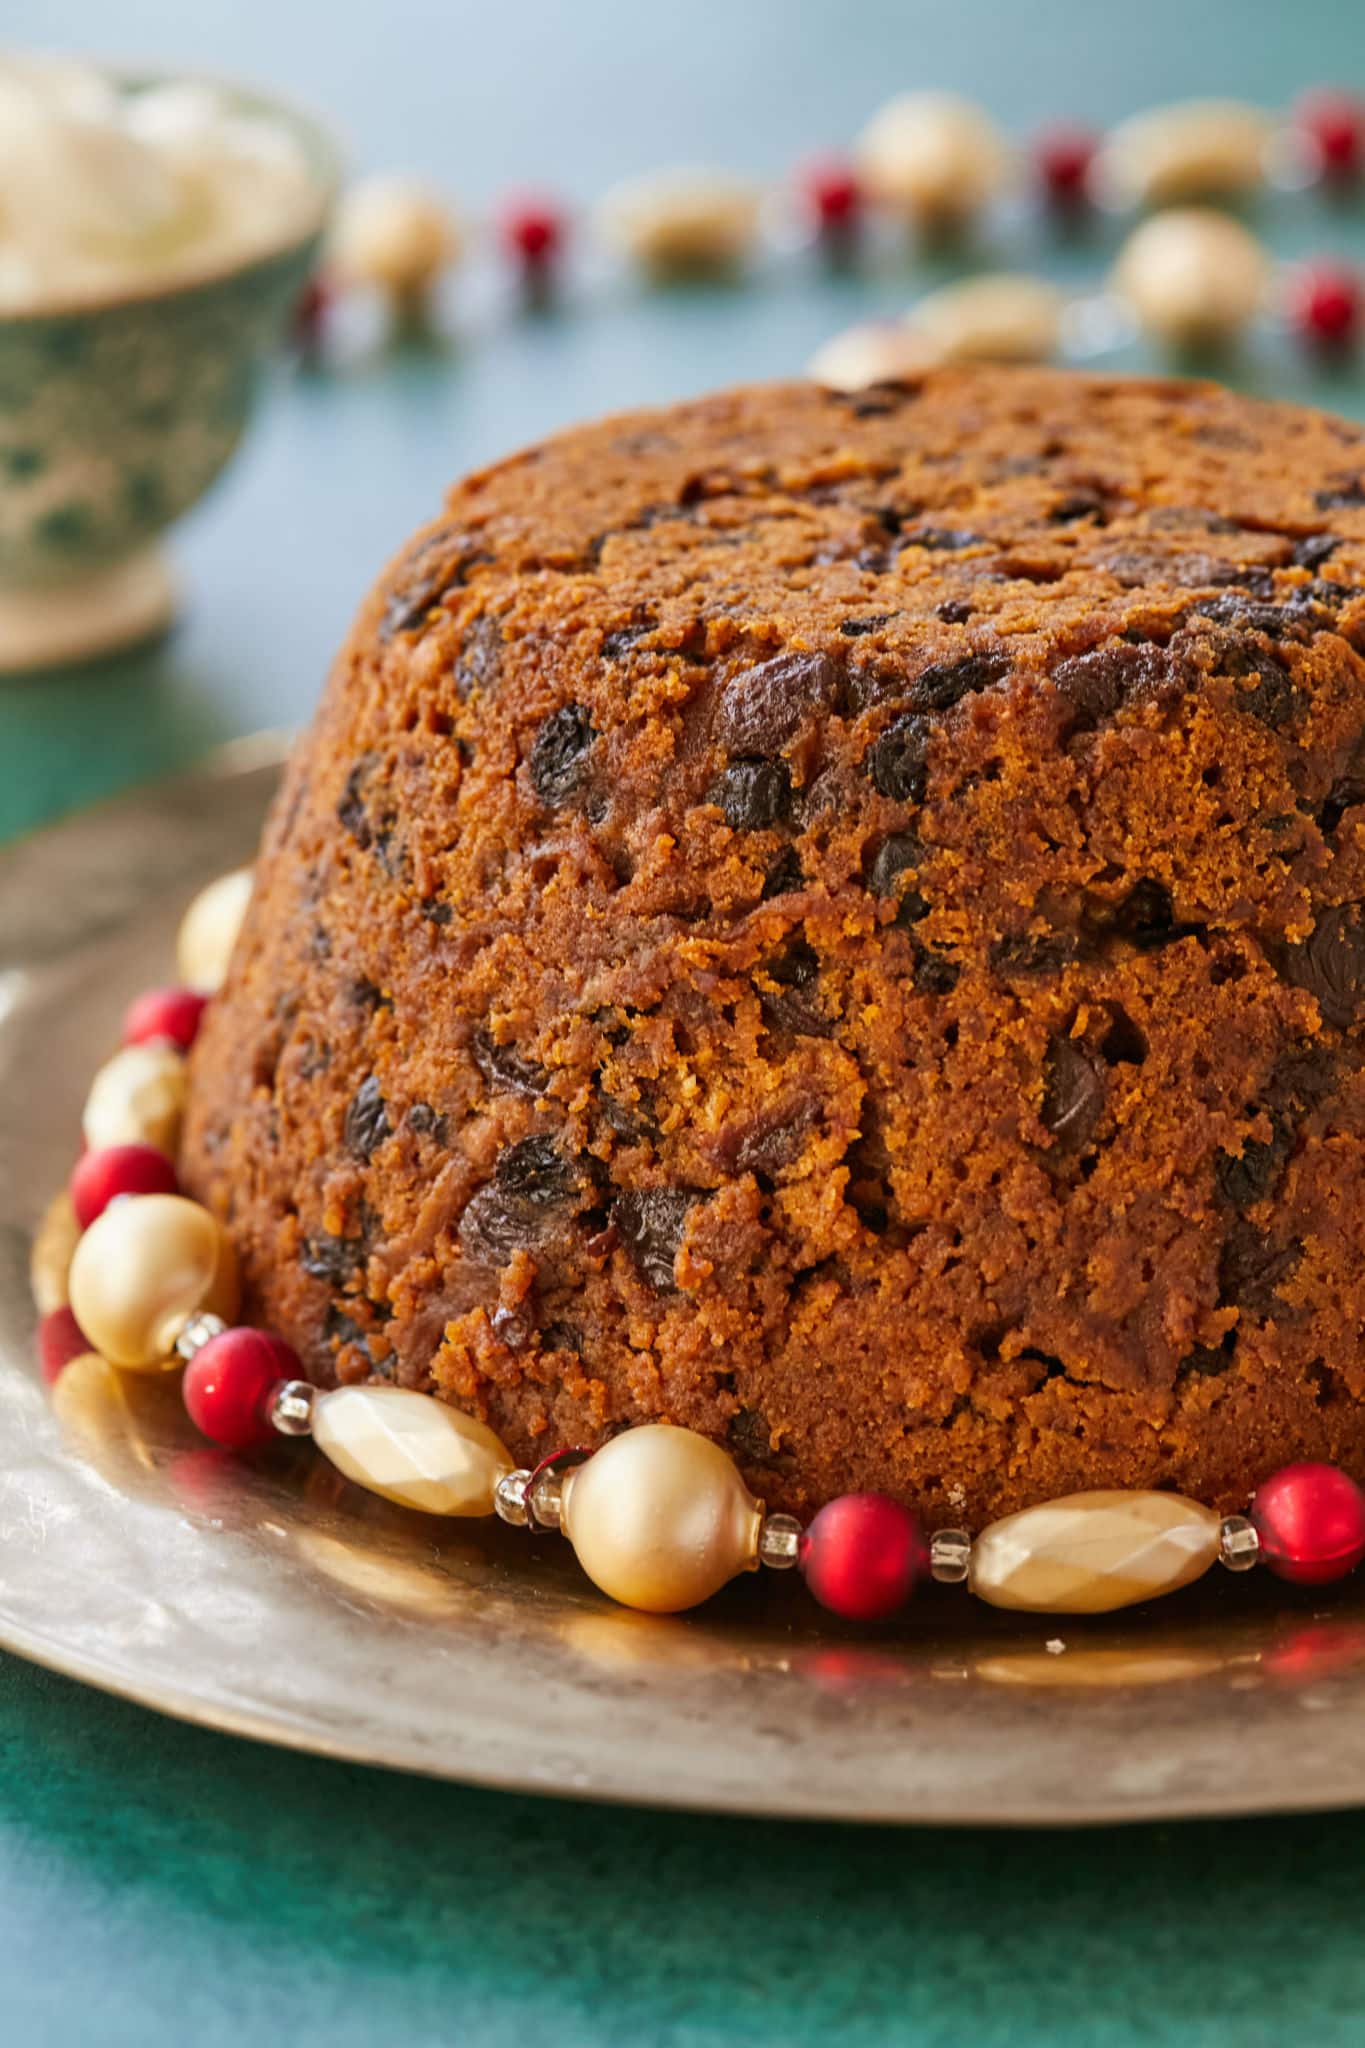 A close up of my mum's classic Christmas pudding, to show texture.